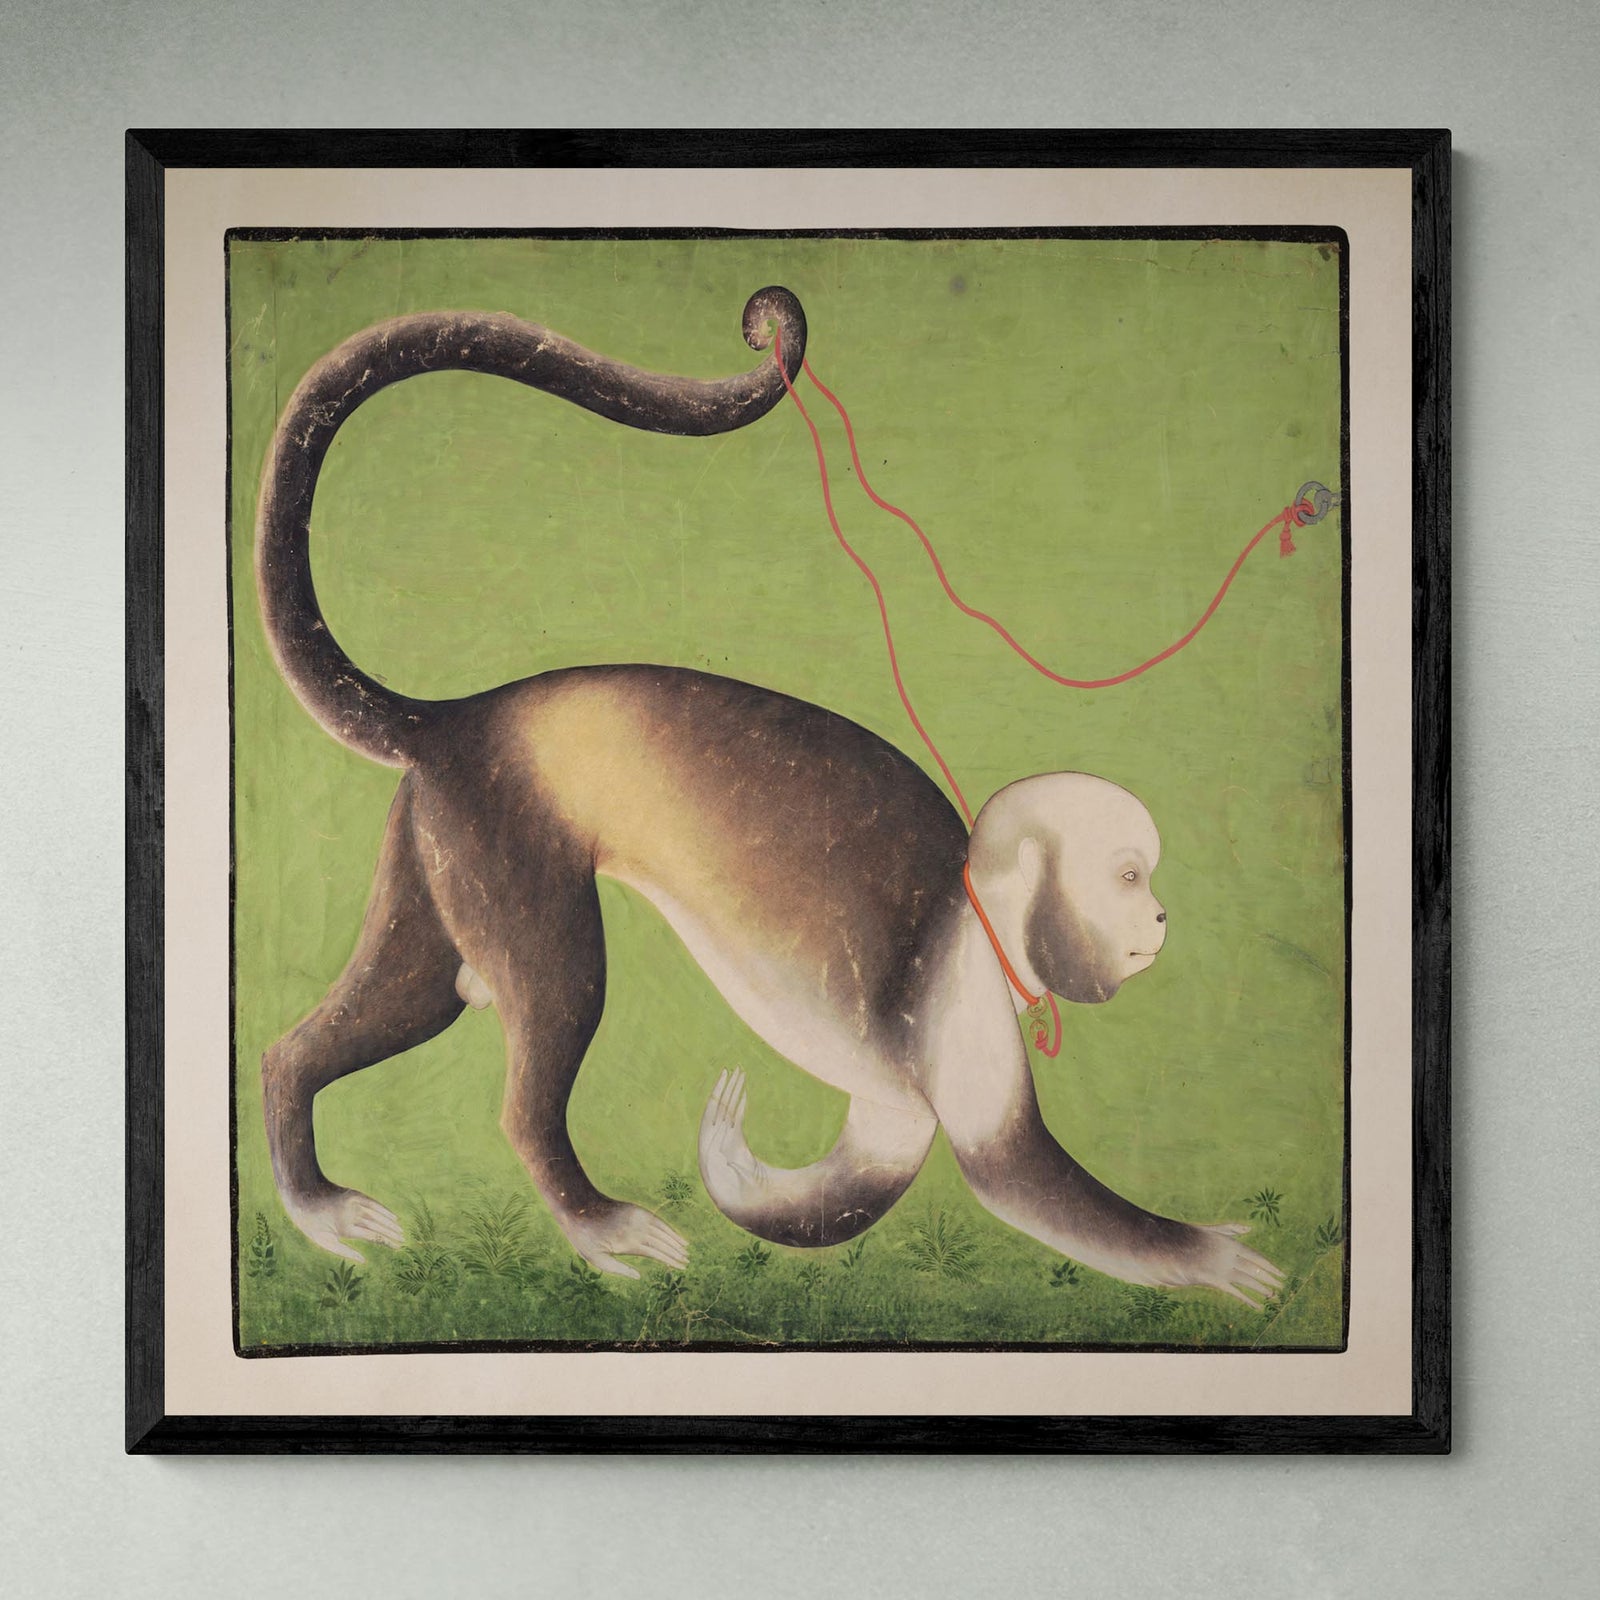 giclee 6"x6" A Monumental Portrait of a Monkey, Rajasthan, Antique India Ape Surreal Asian Green Woodblock Fine Art Print